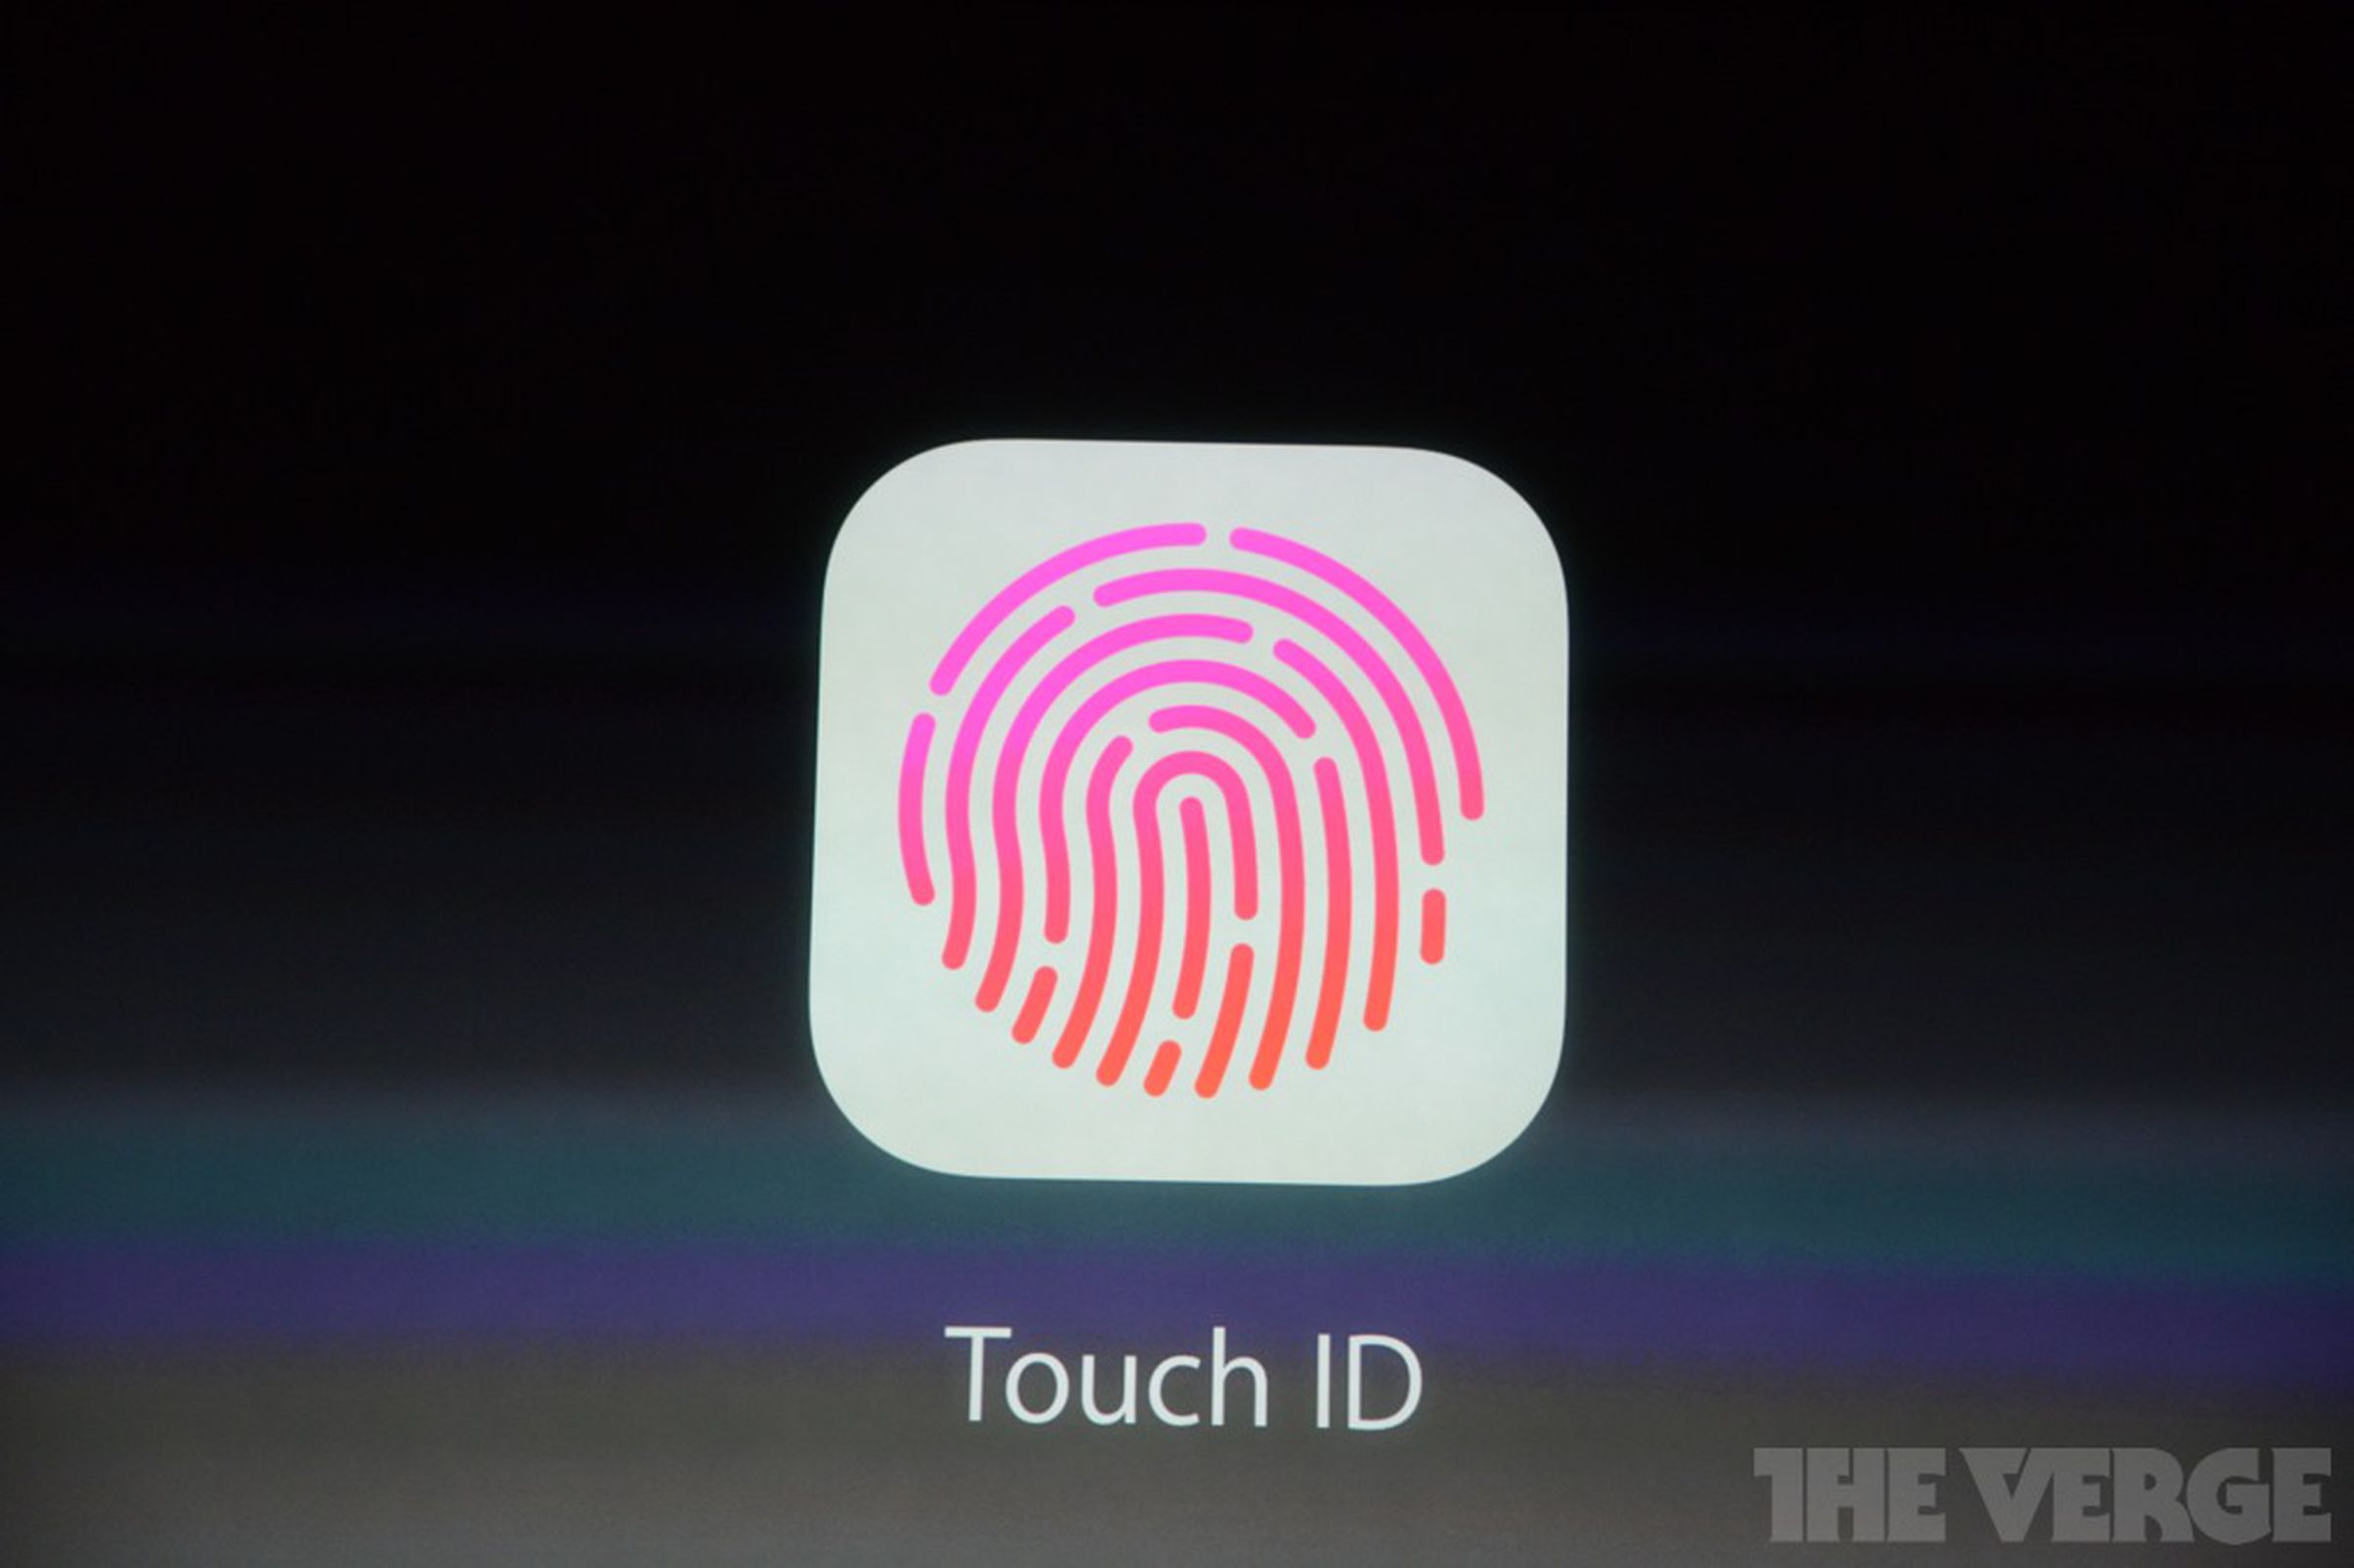 iPhone 5s Touch ID Gallery